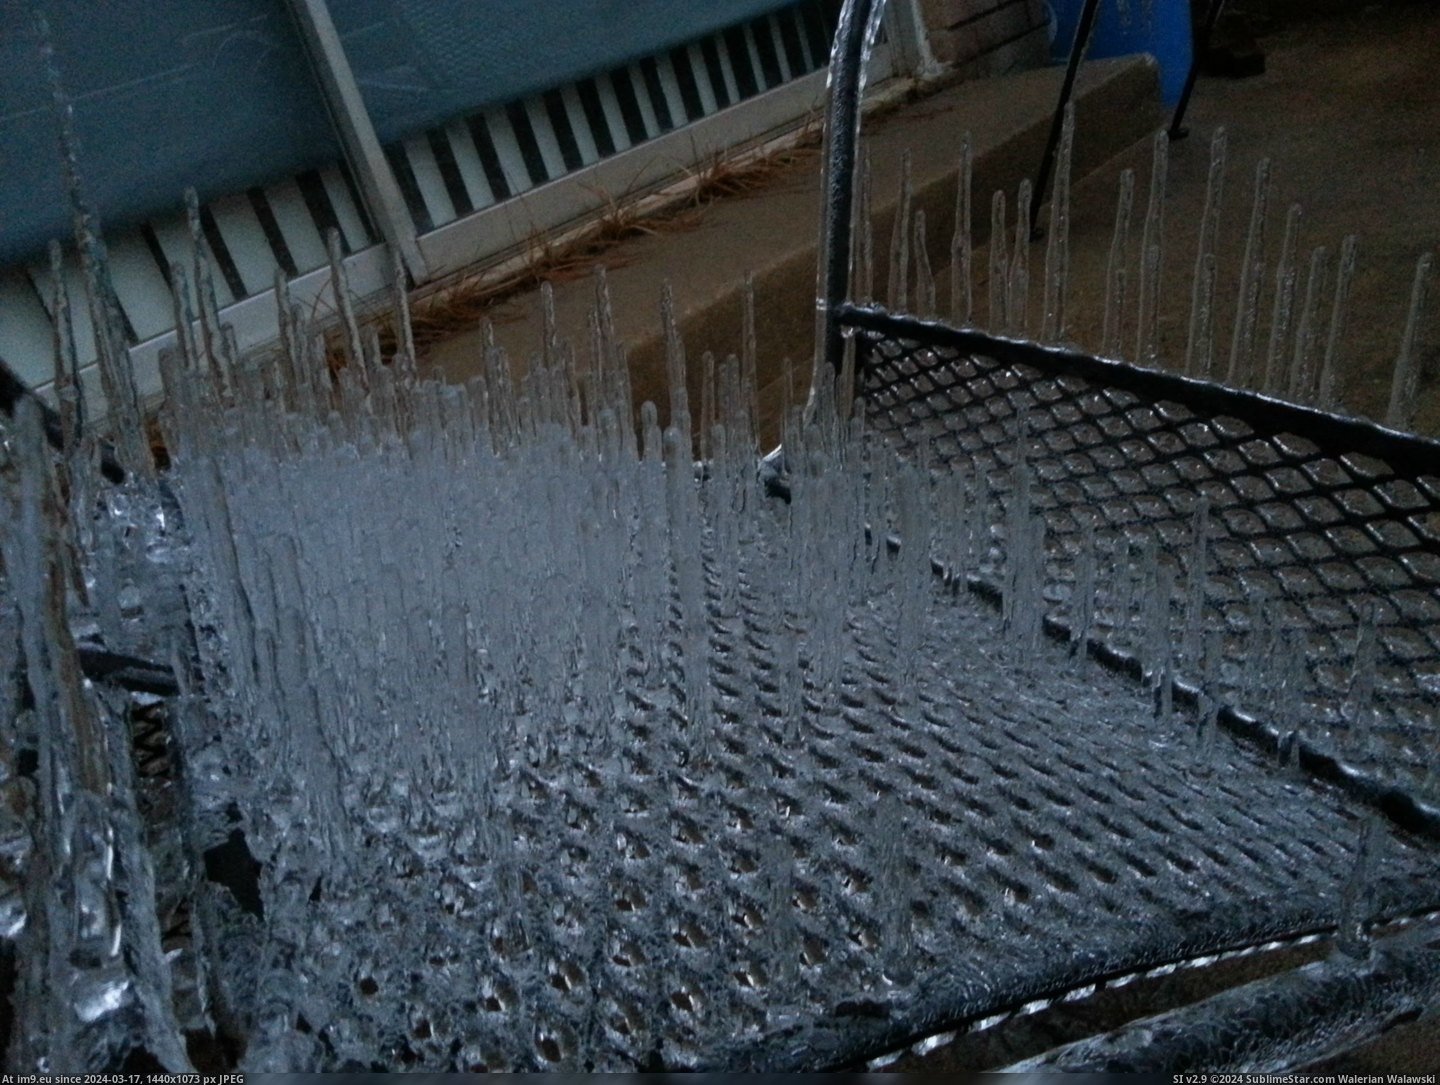 #Ice #Storm #Mesh #Furniture #Patio [Mildlyinteresting] This is what happens to mesh patio furniture in an ice storm 2 Pic. (Obraz z album My r/MILDLYINTERESTING favs))